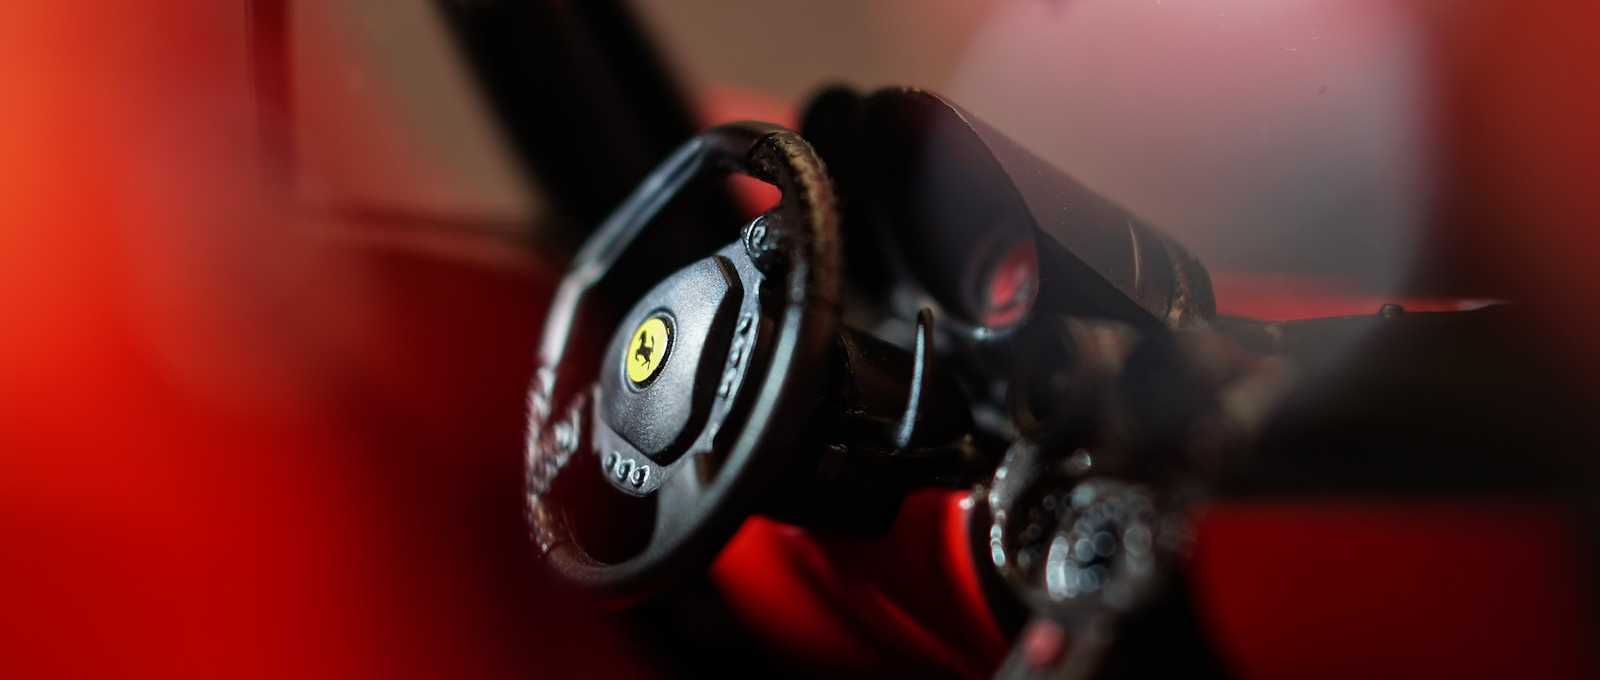 Enzo Ferrari Best quotes and lessons that we have learn from them